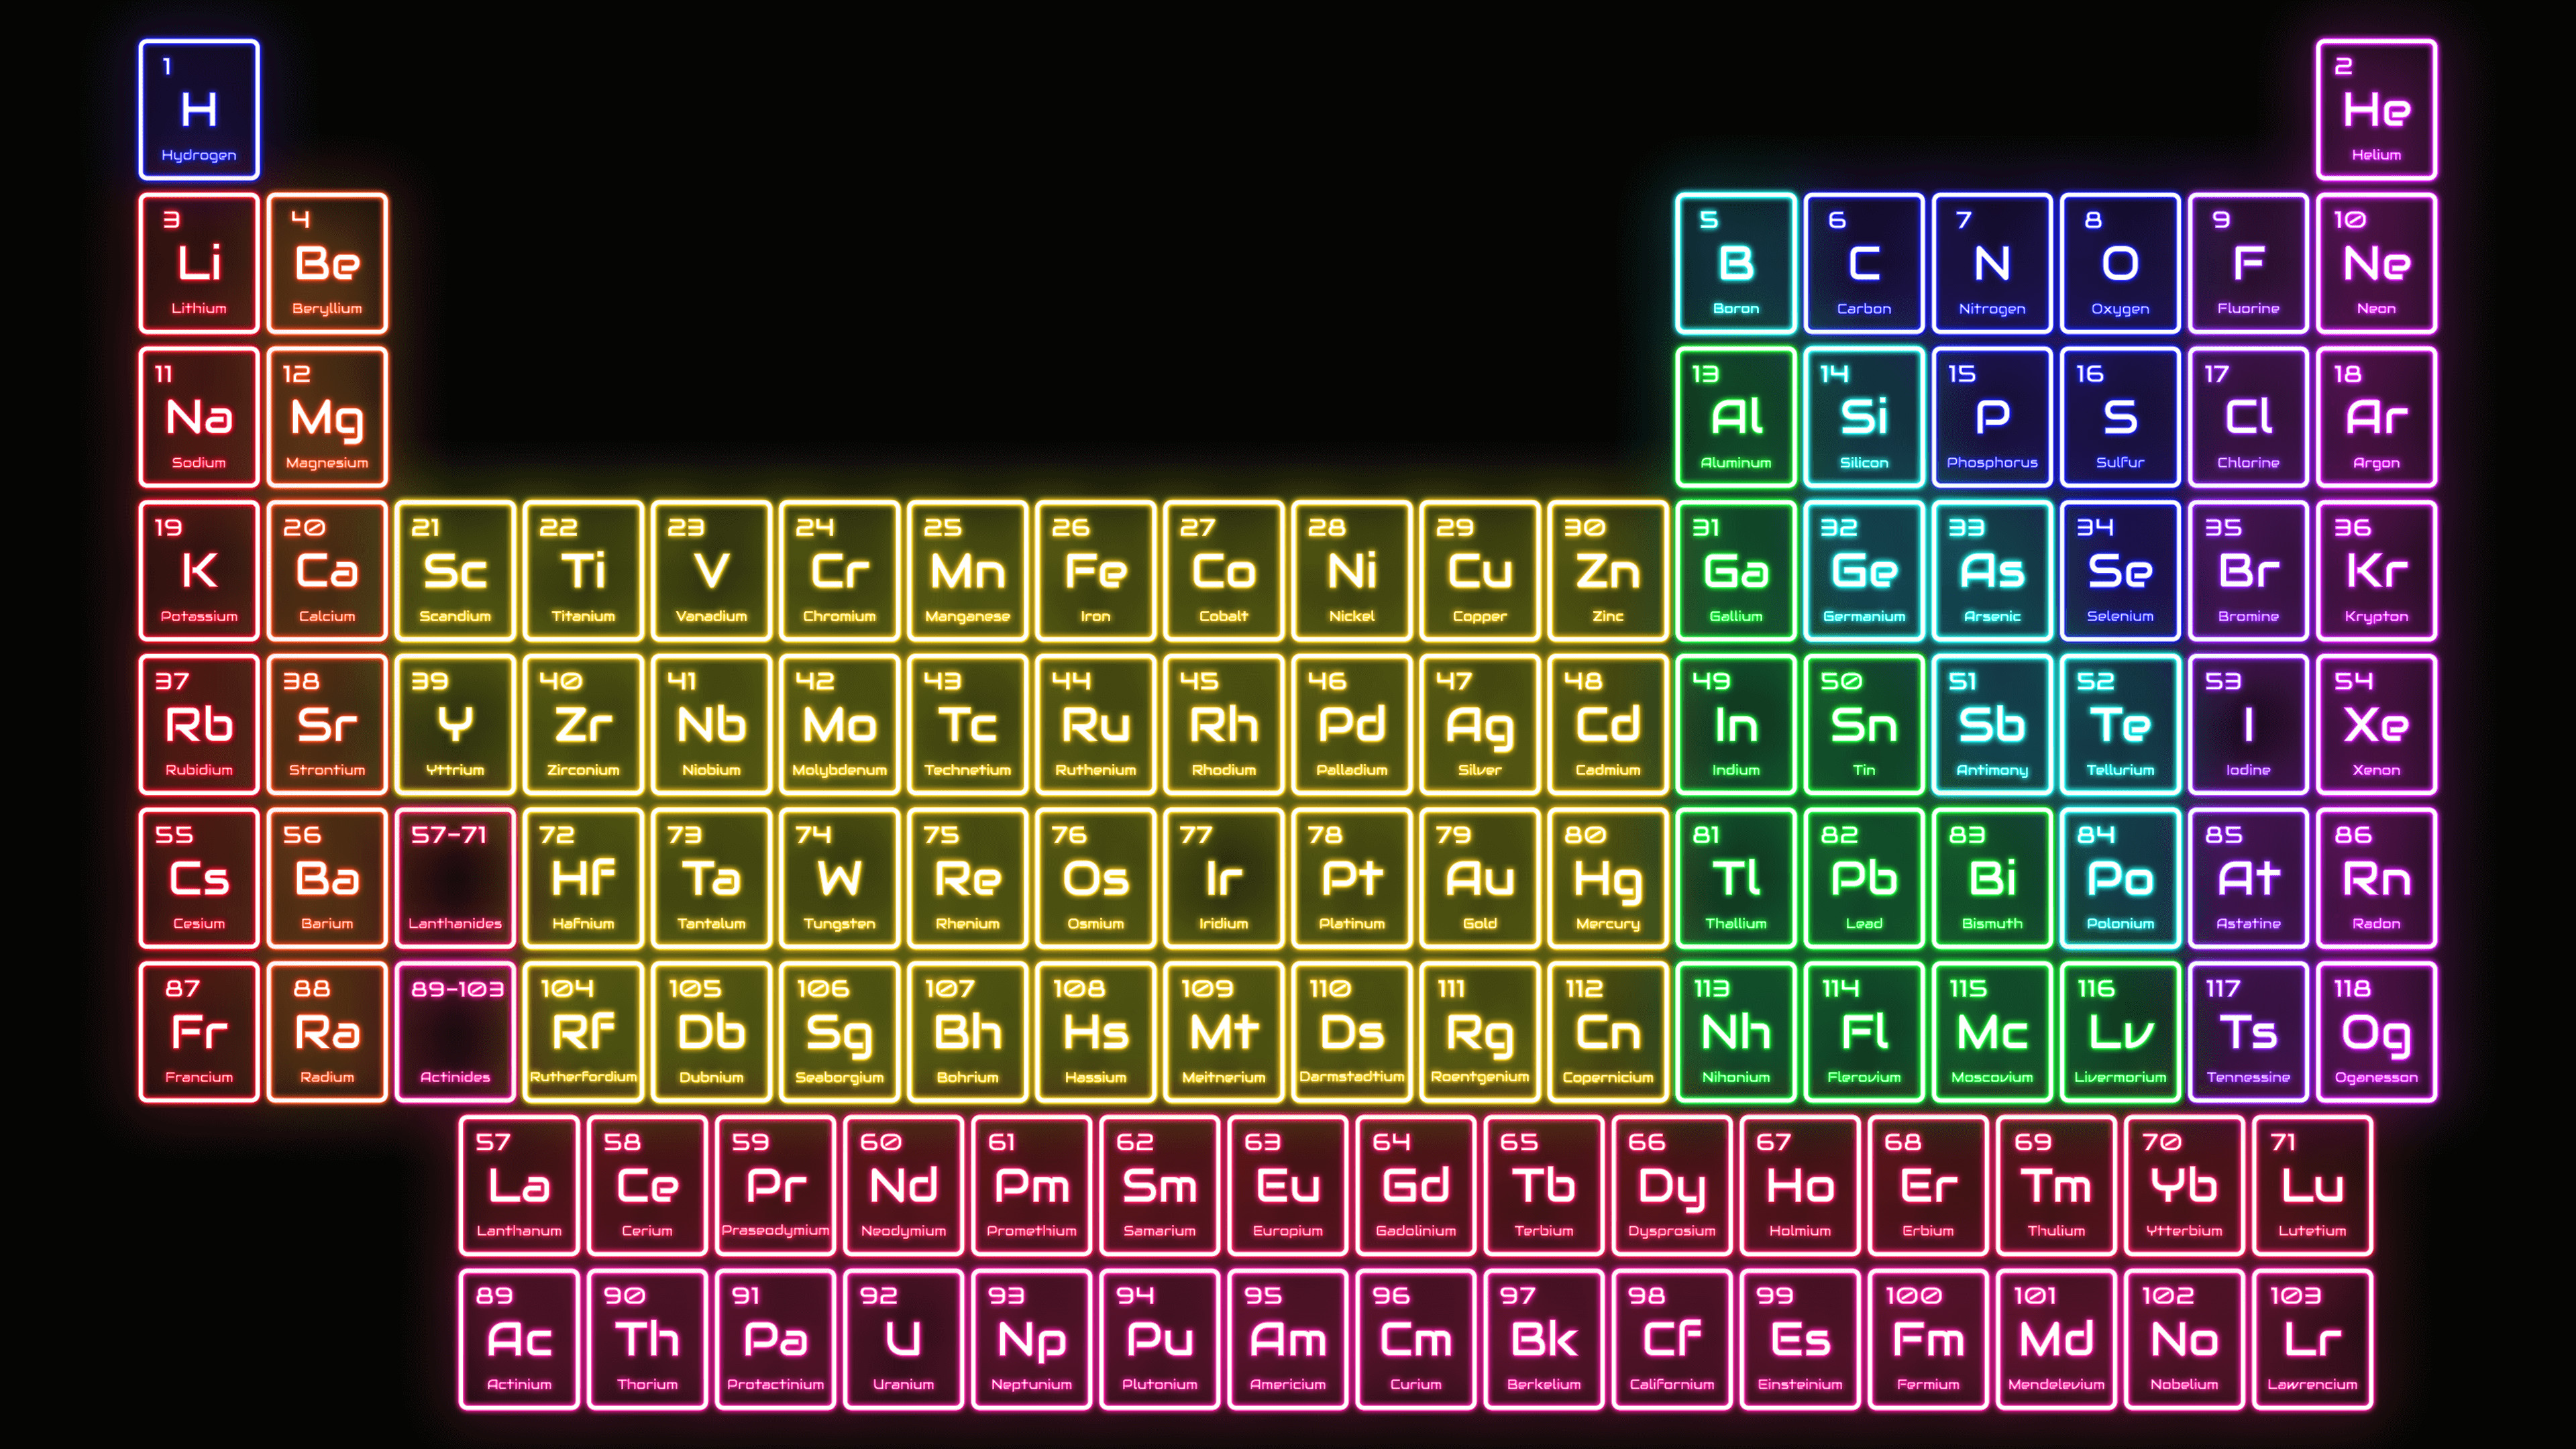 3840x2160 This colorful neon lights periodic table wallpaper shines brightly with a  subtle glow. Contains the